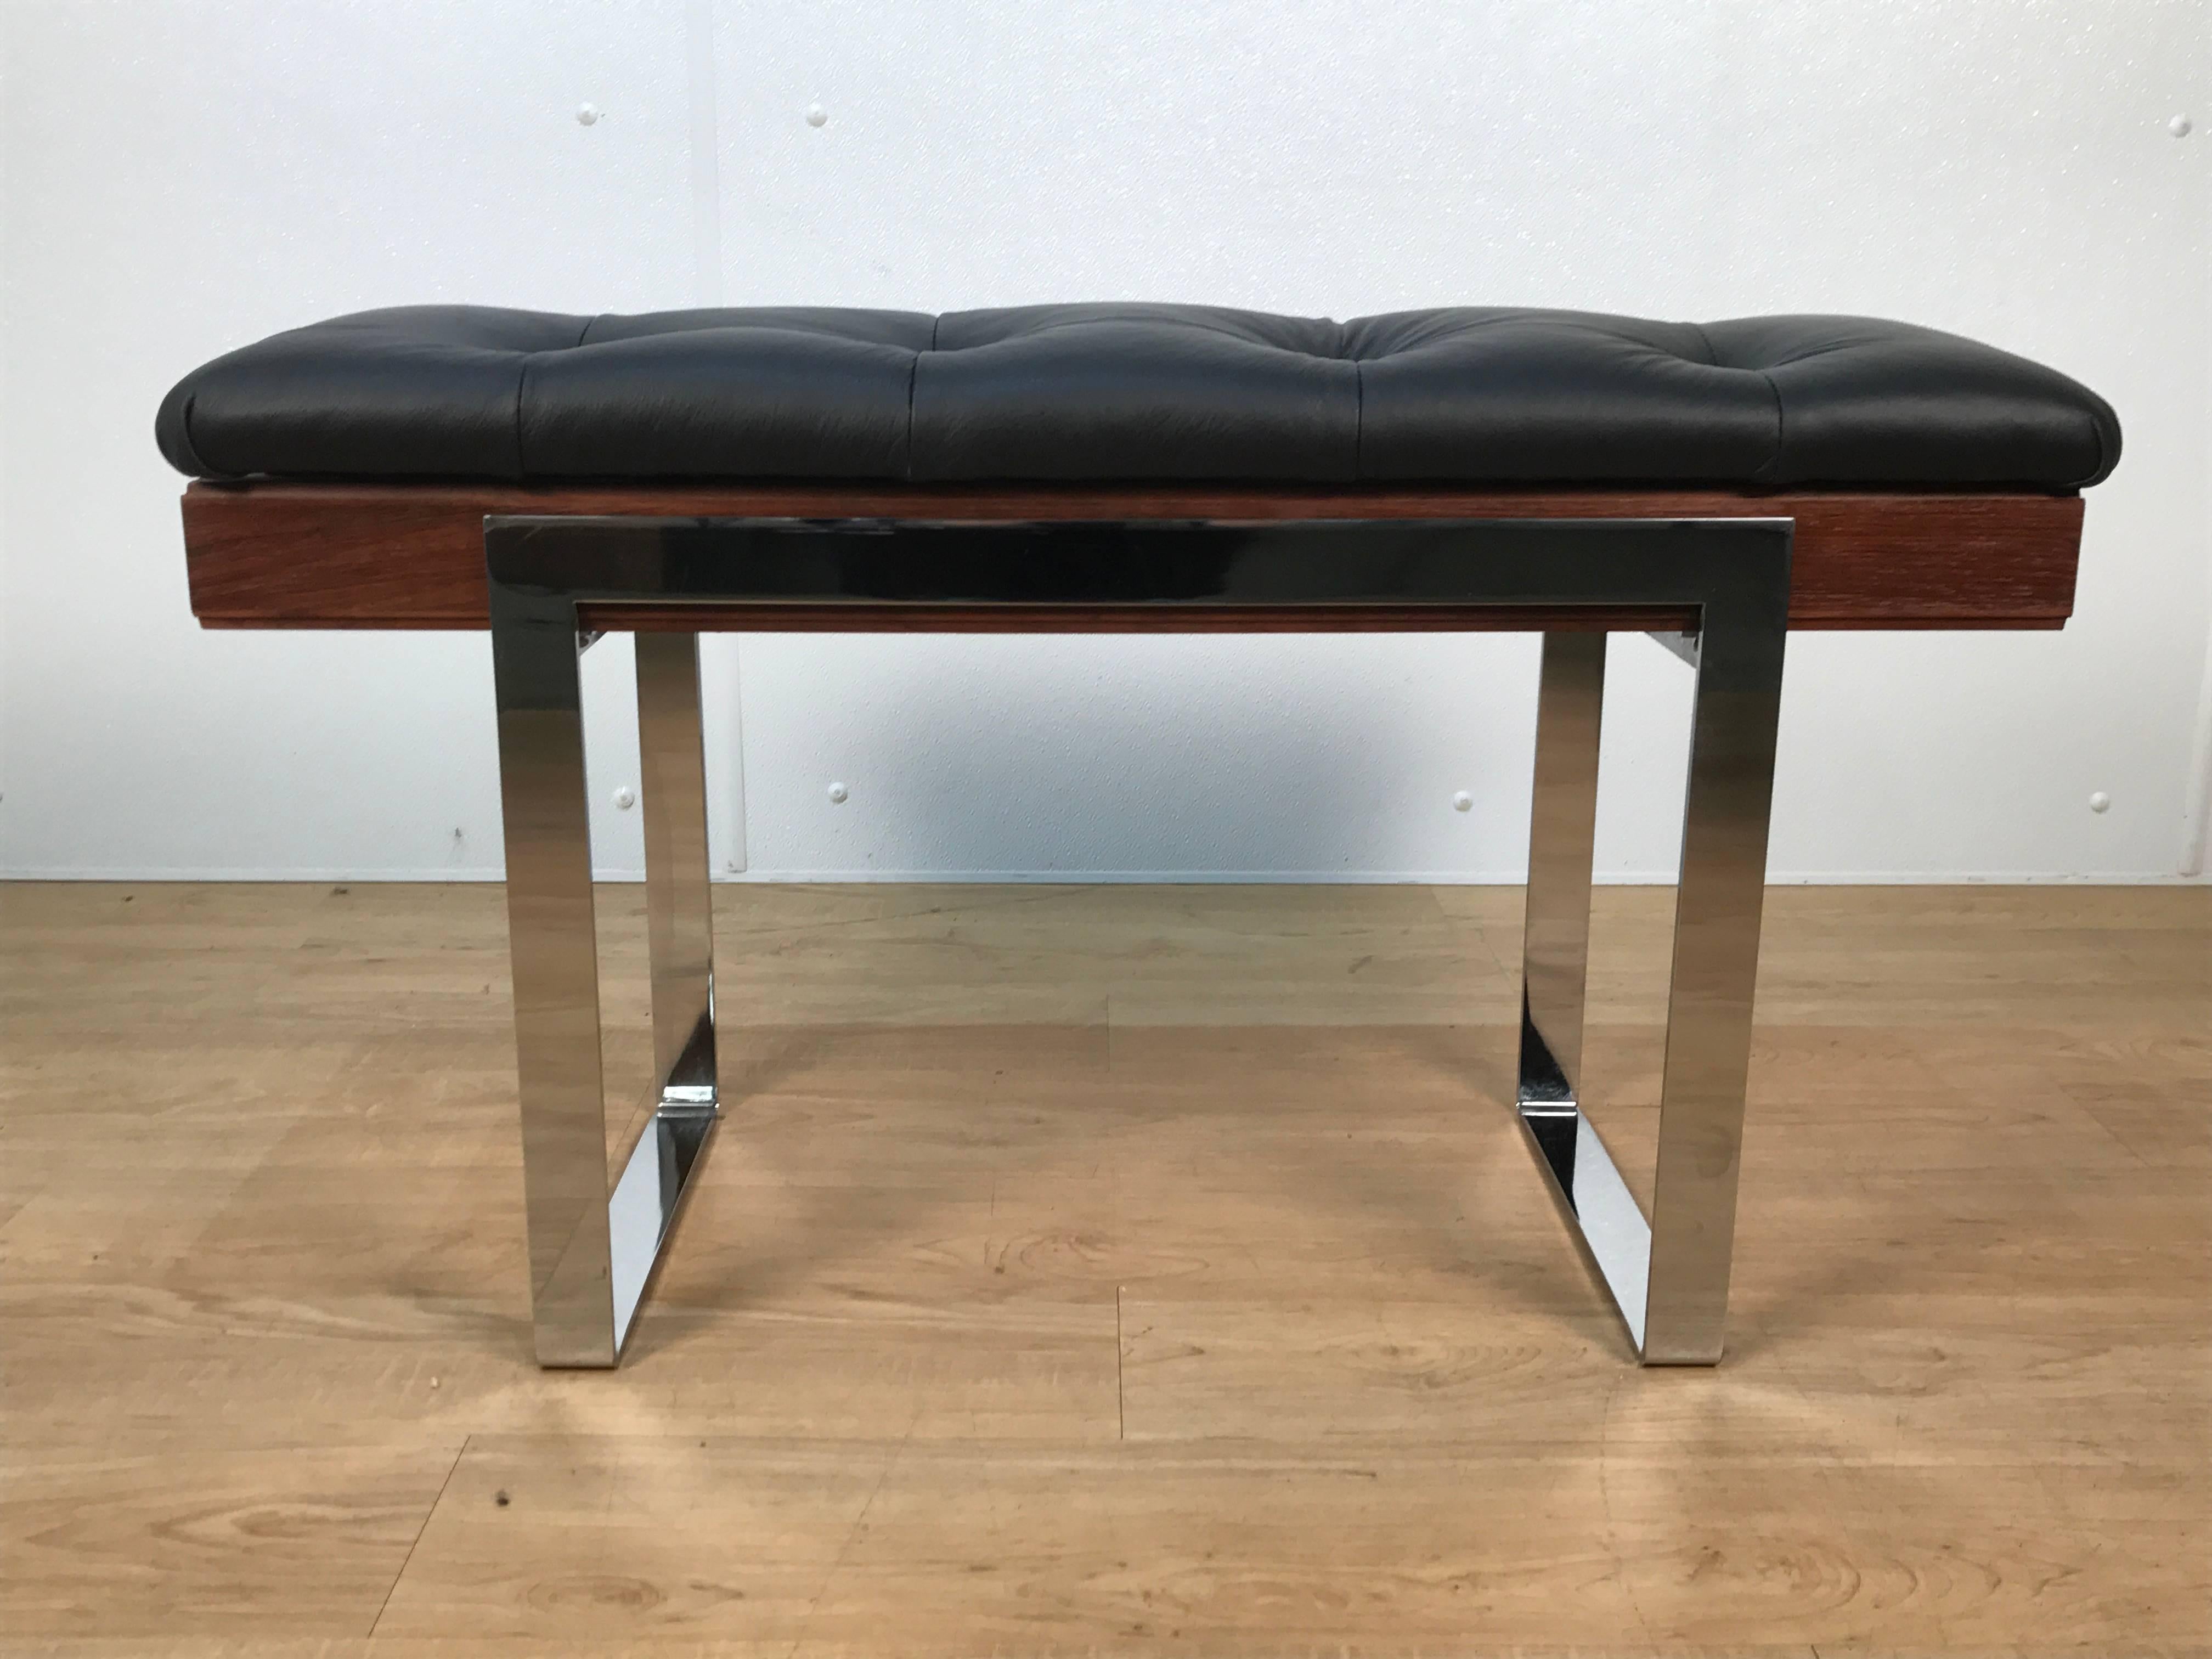 Milo Baughman leather and rosewood bench, newly upholstered black leather seat.